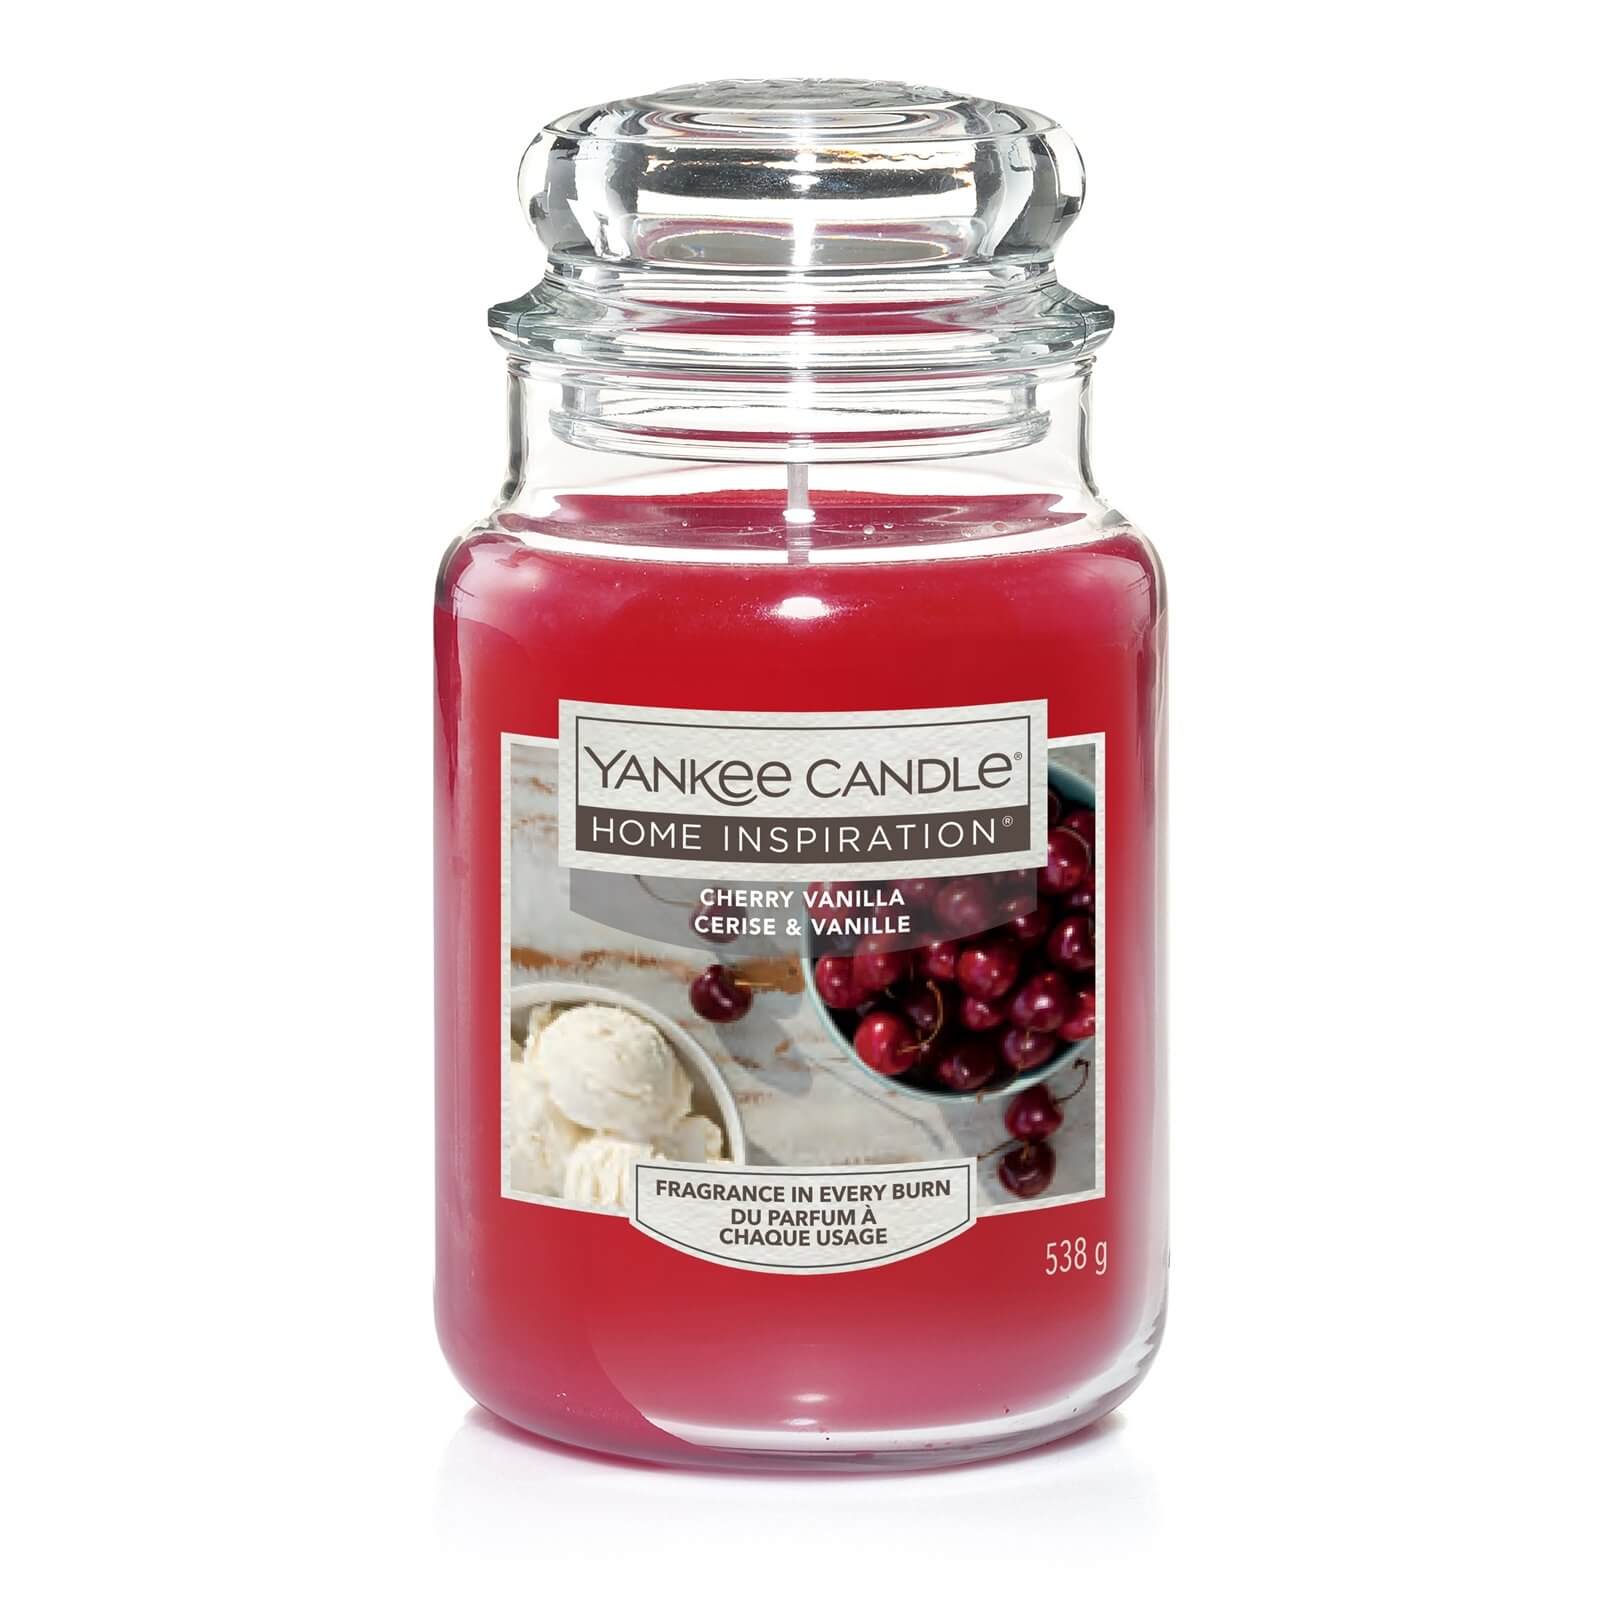 Yankee Candle Home Inspiration Scented Candle - Large Jar - Cherry Vanilla